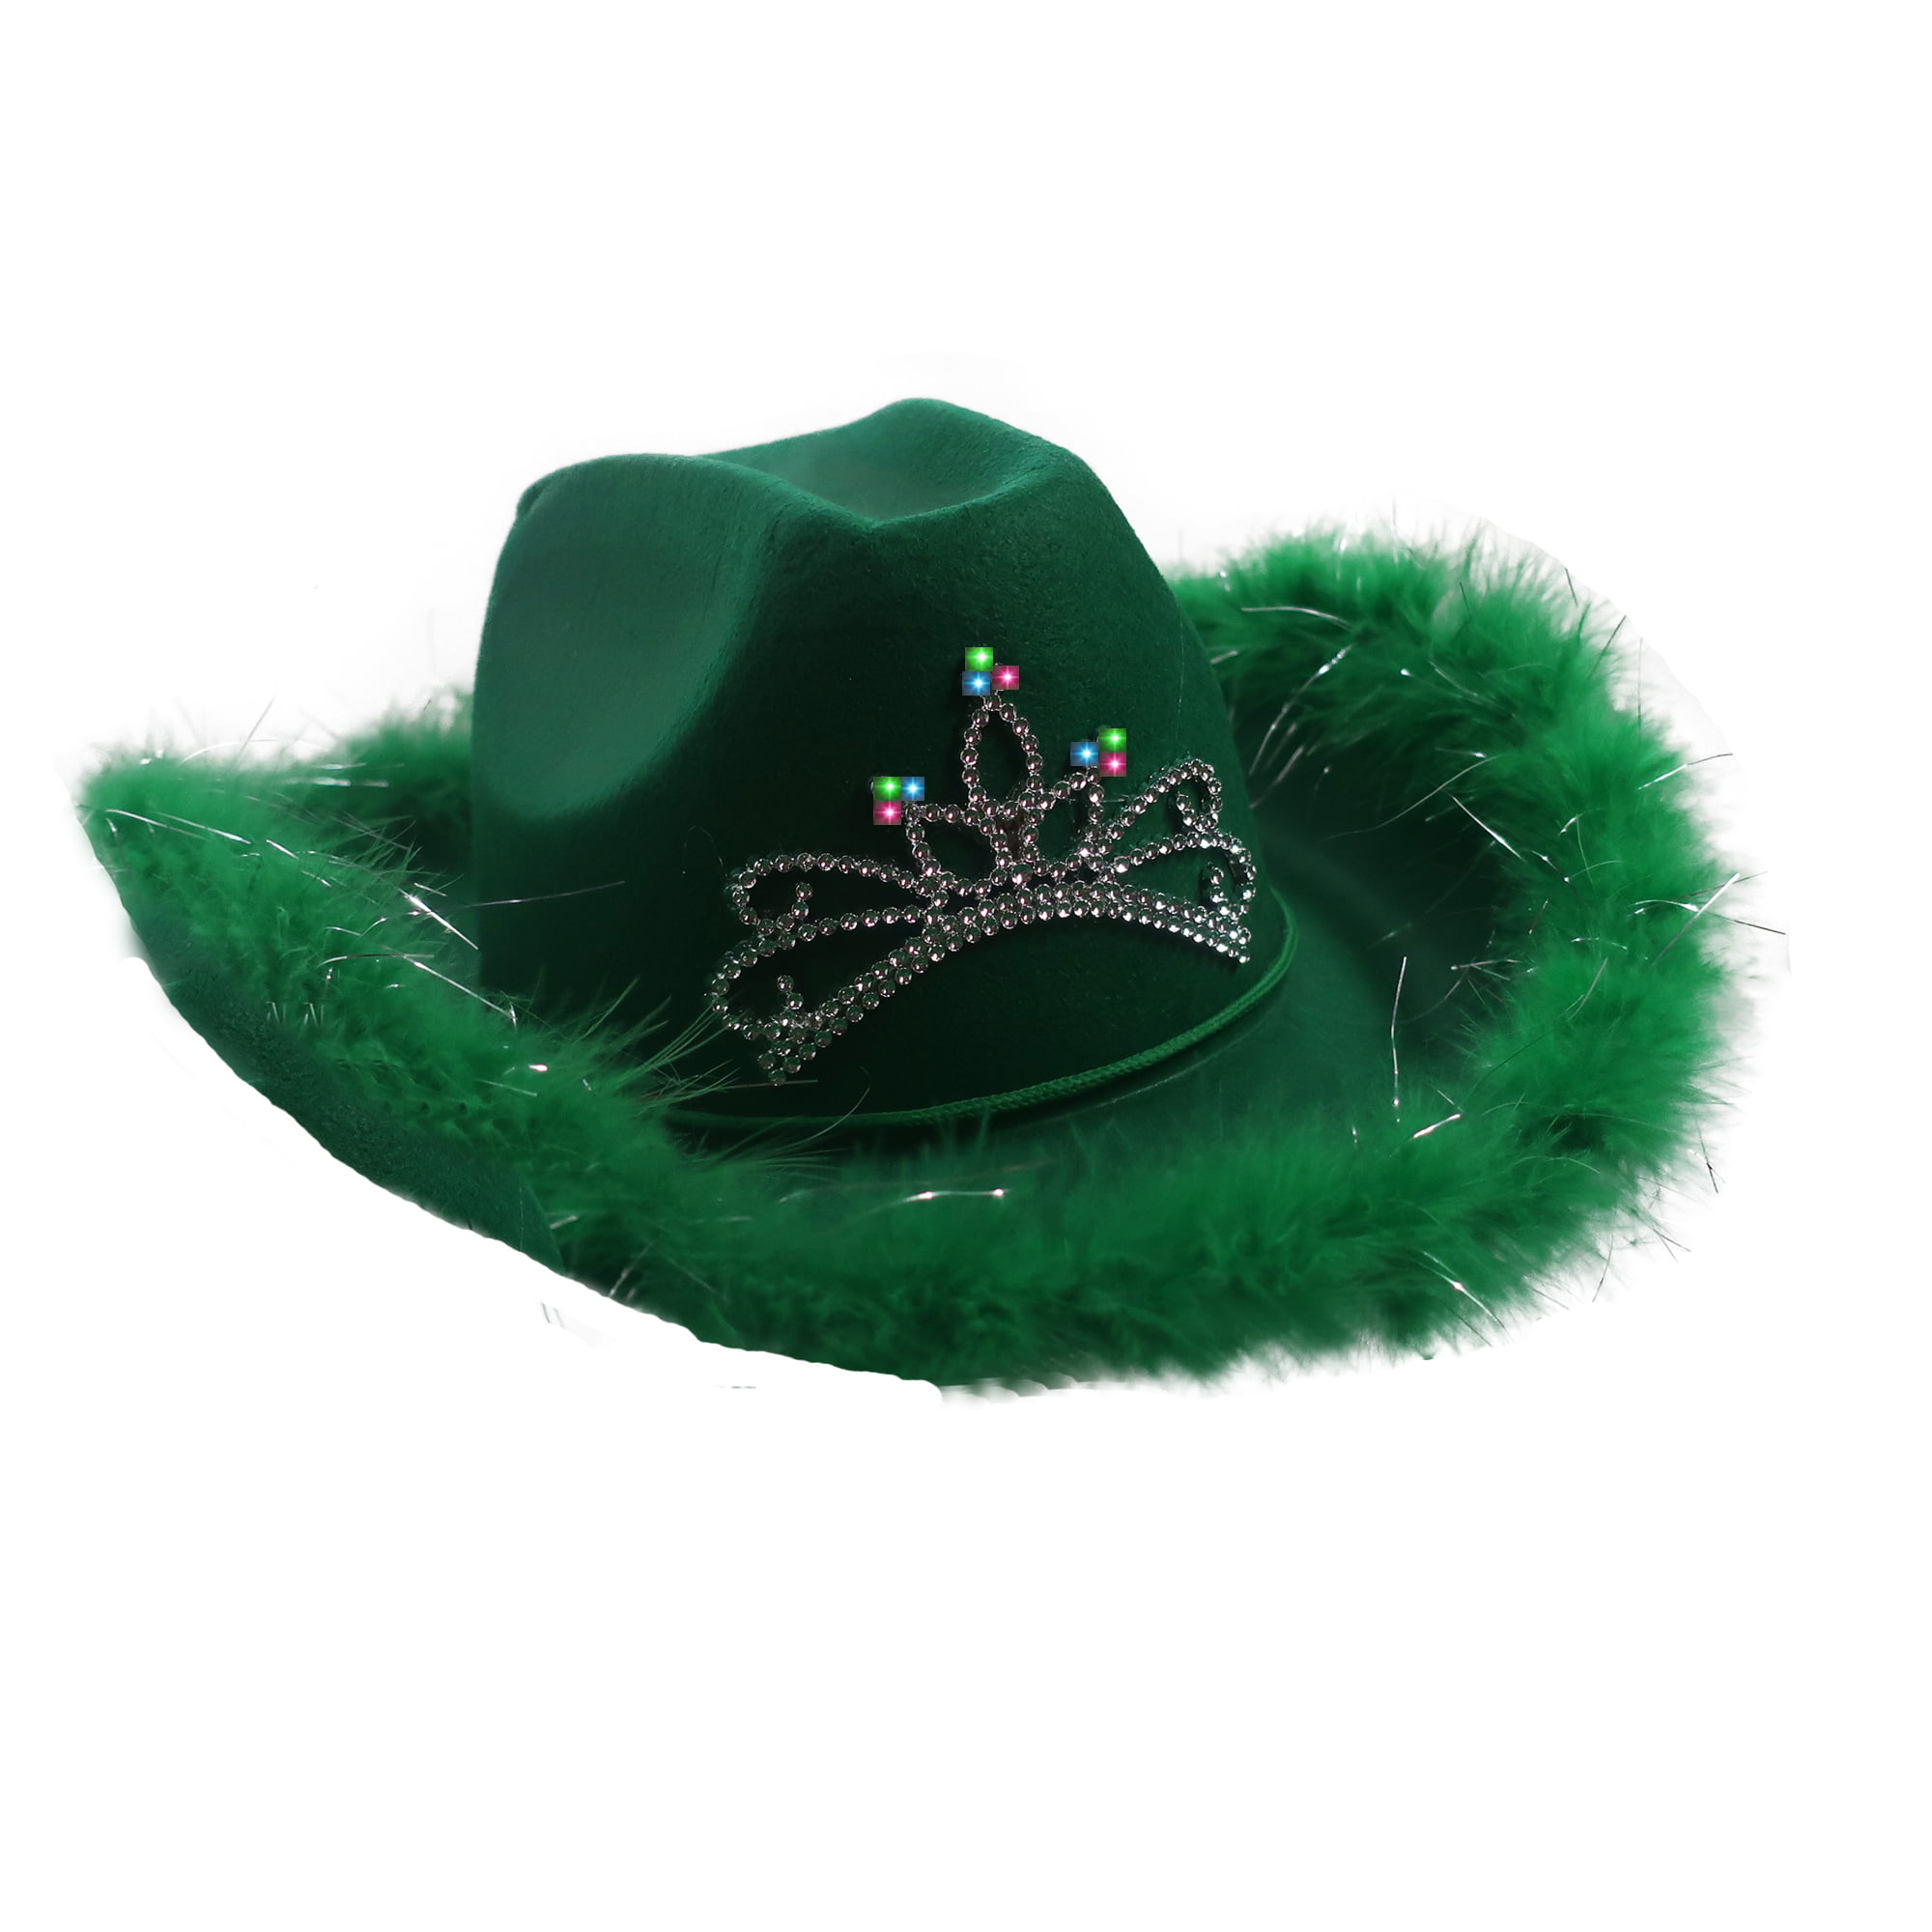 PlayO Blinking Tiara Felt Cowboy Cowgirl Dress Up Hat with Feather Trim 